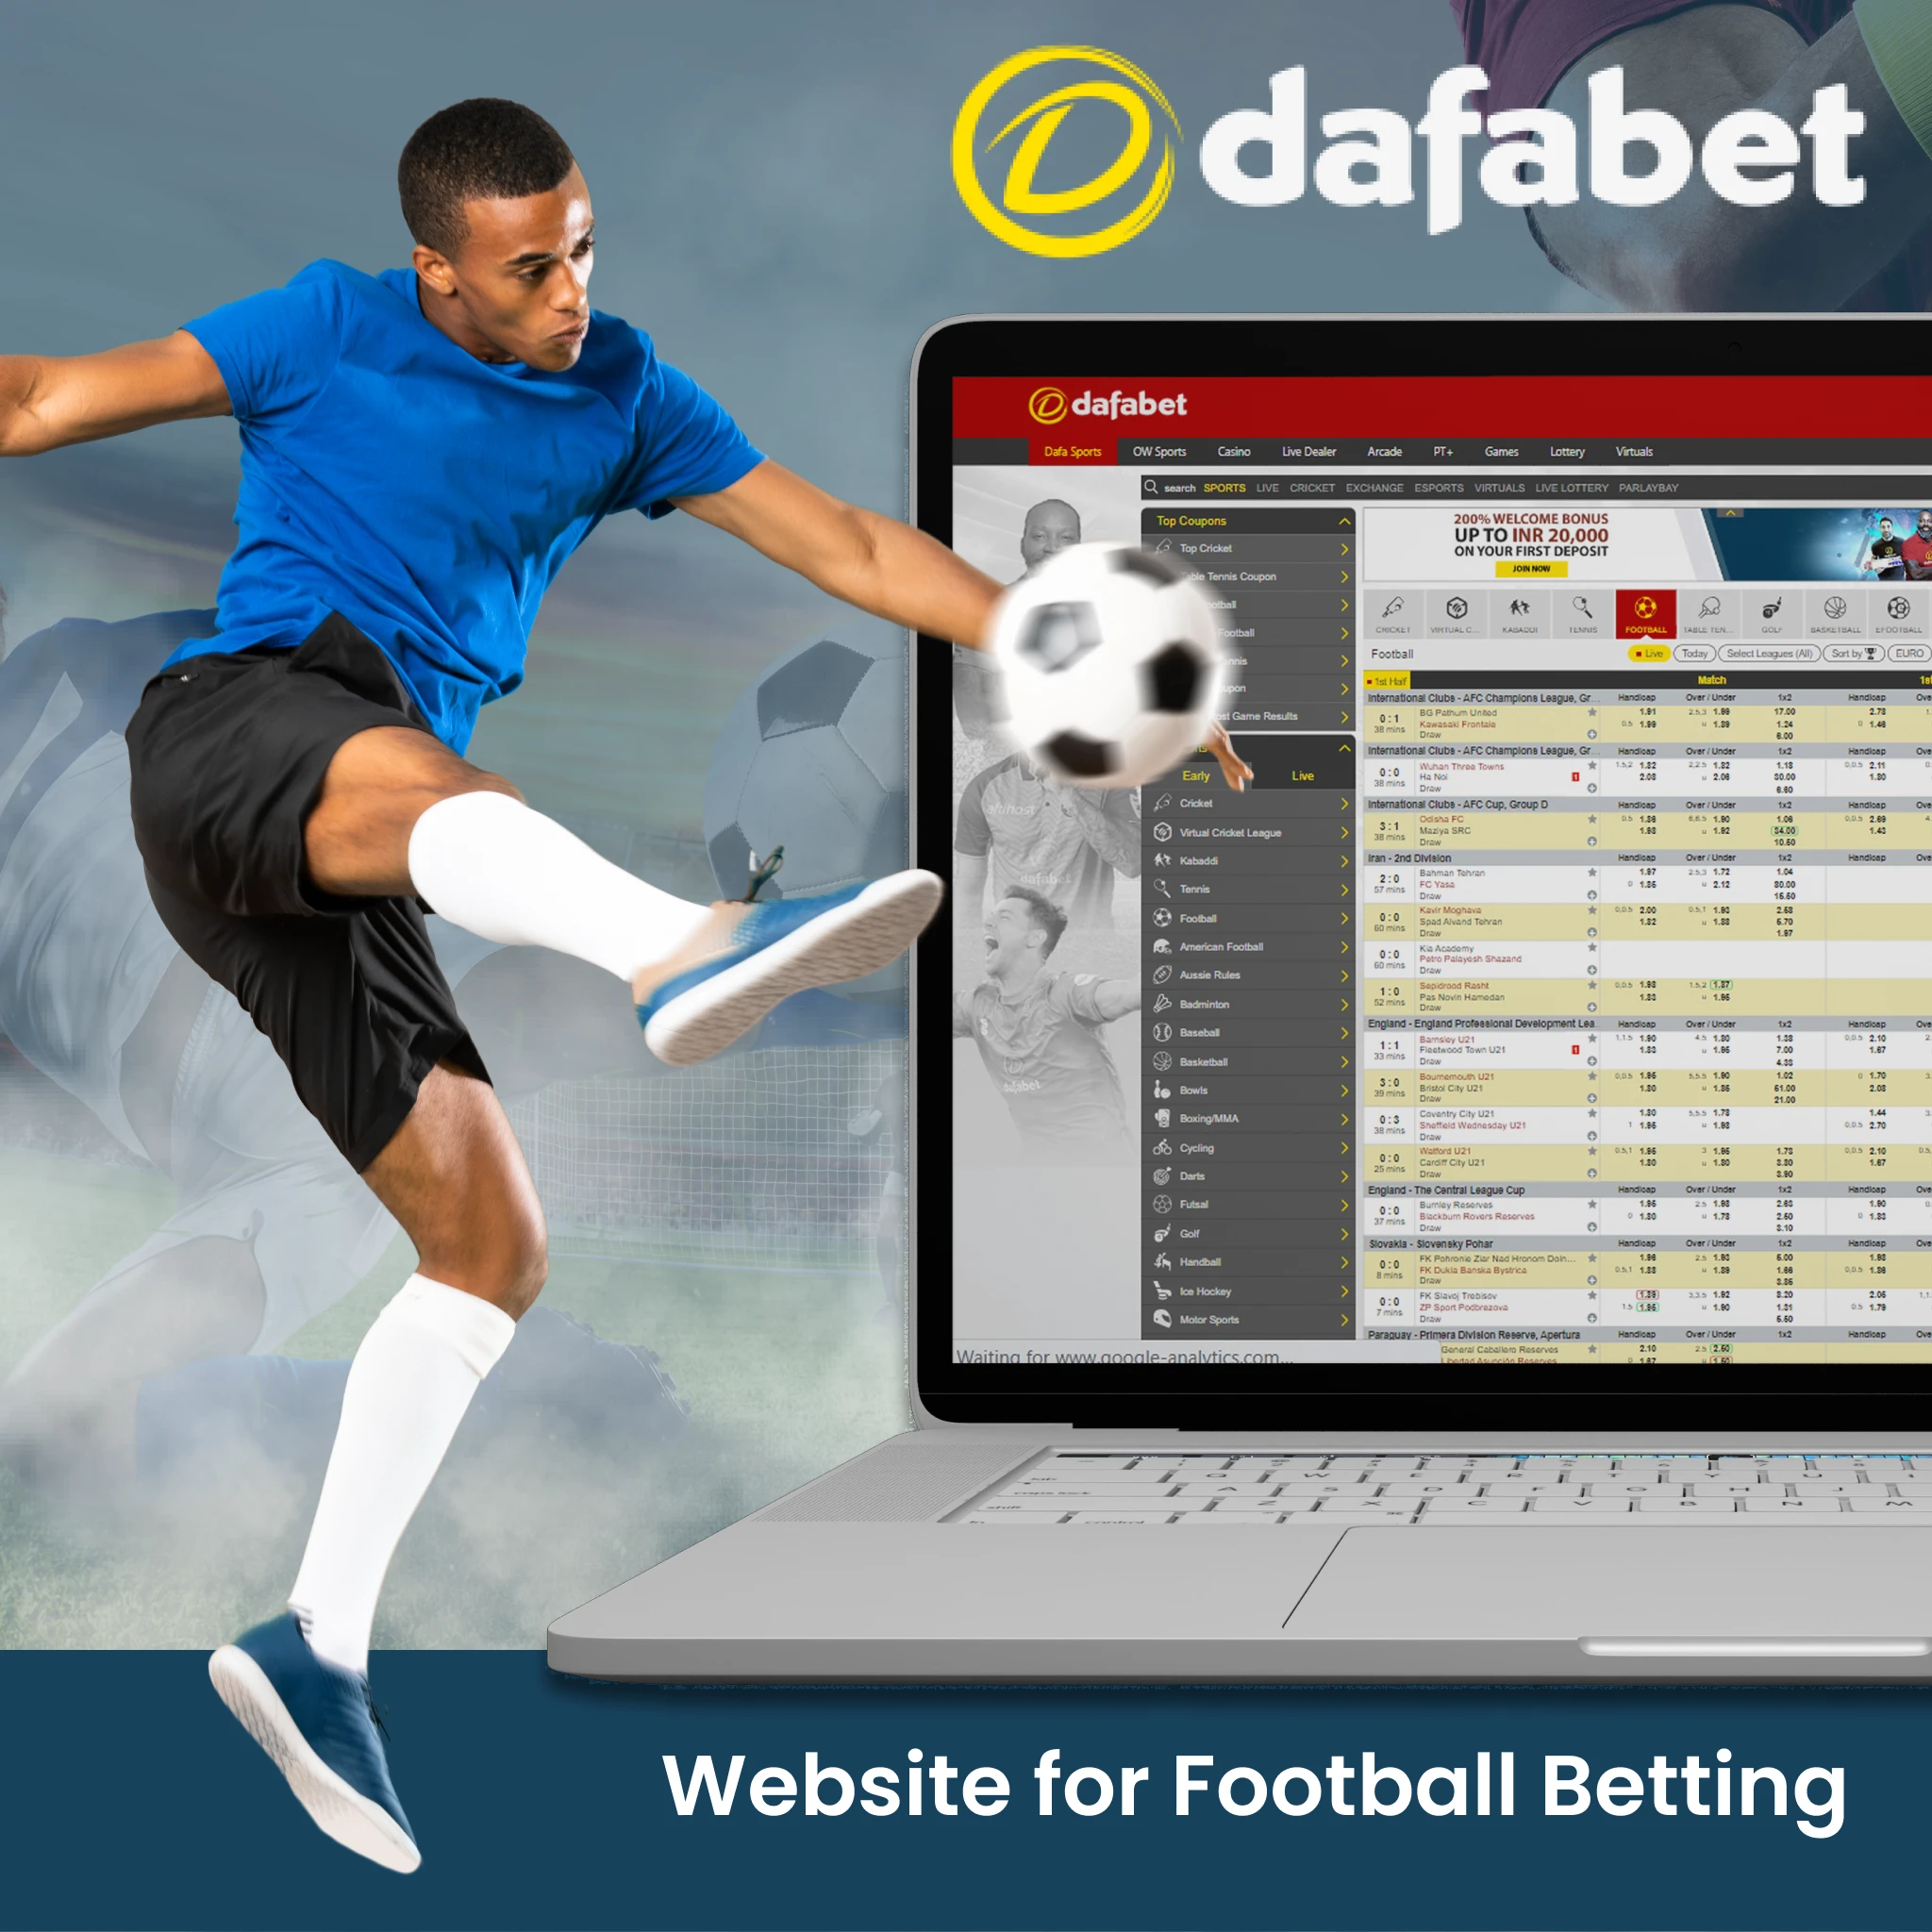 If you want to bet live and watch live soccer matches daily, you should start doing so with the Dafabet platform.